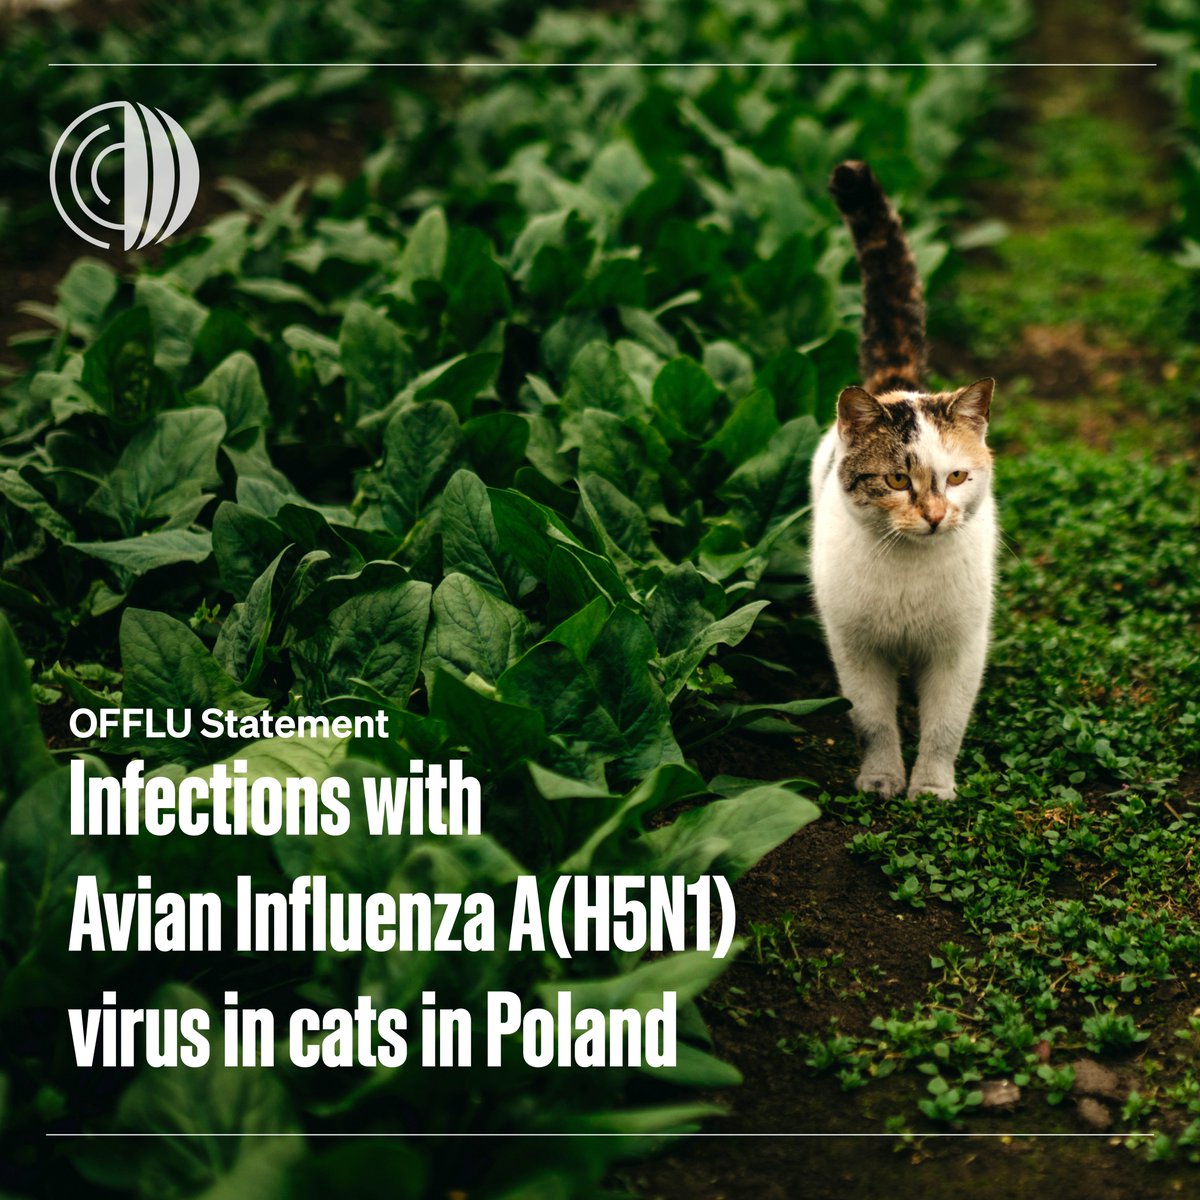 #Poland has reported outbreaks of #AvianInfluenza in domestic cats, with multiple deaths throughout the country. Suspected cases should be isolated from other pets, & those handling them should wear appropriate personal protective equipment. Learn more: offlu.org/wp-content/upl…